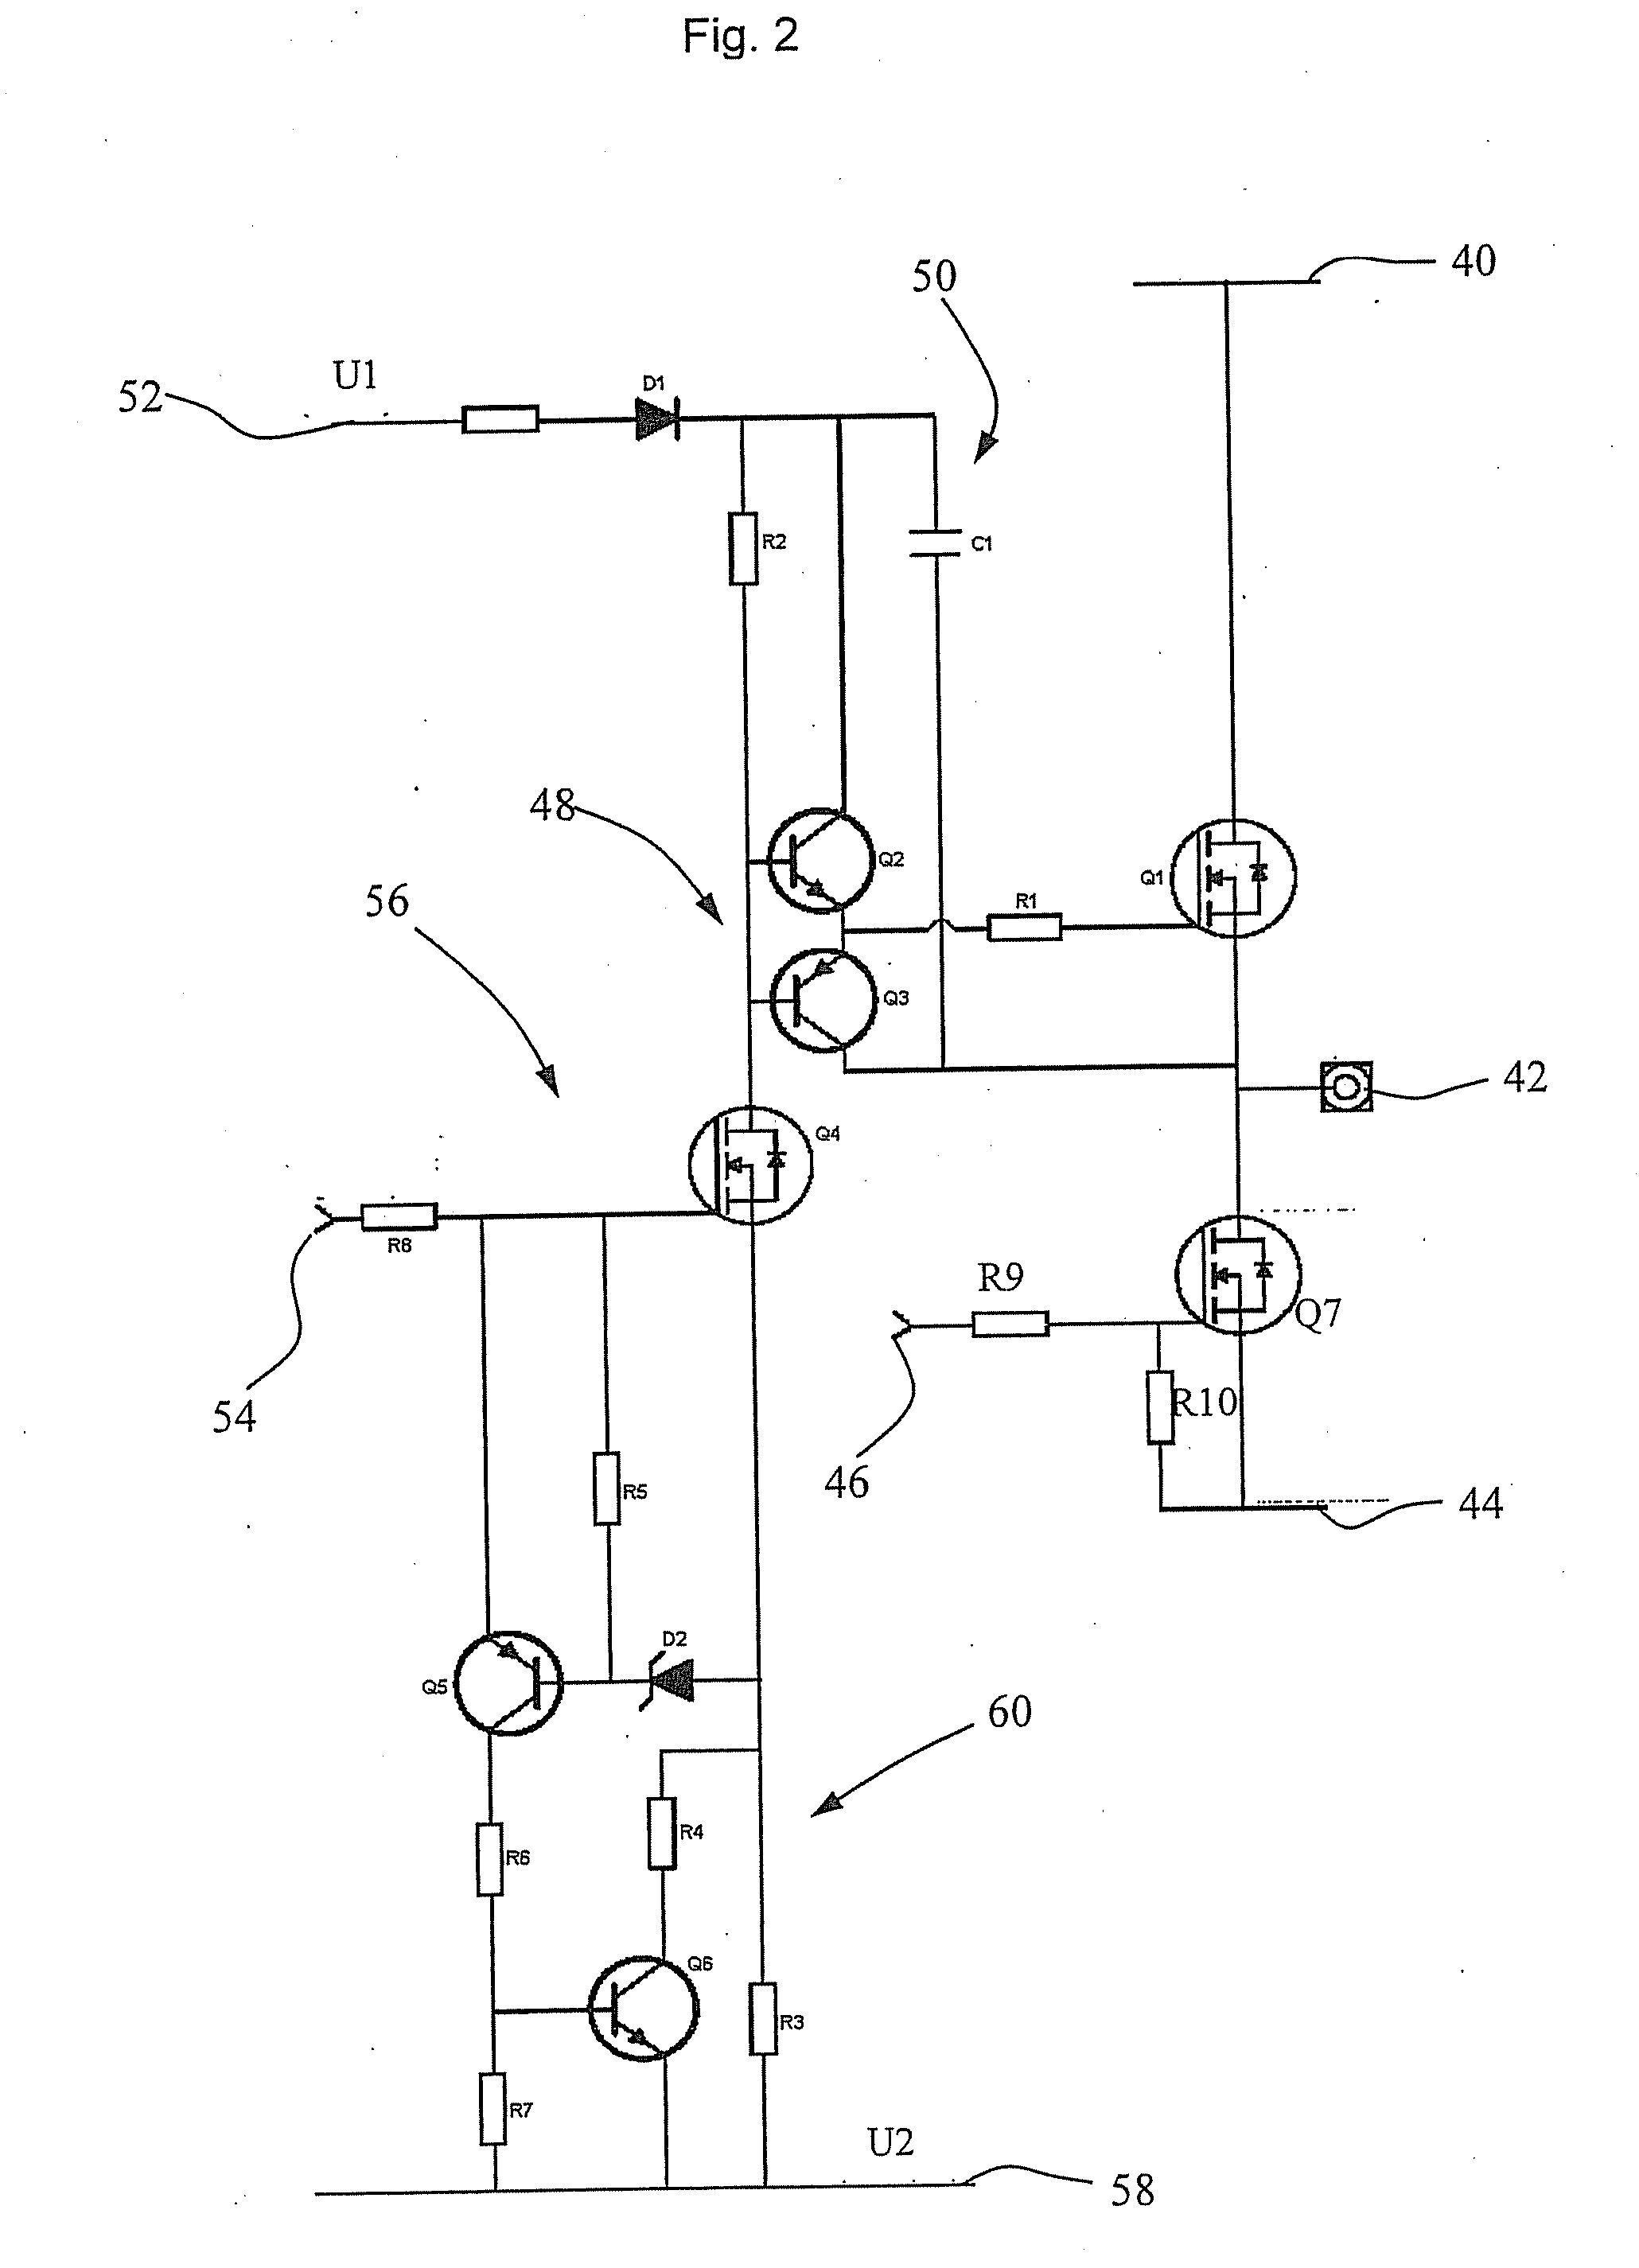 Control circuit for a high-side semiconductor switch for switching a supply voltage